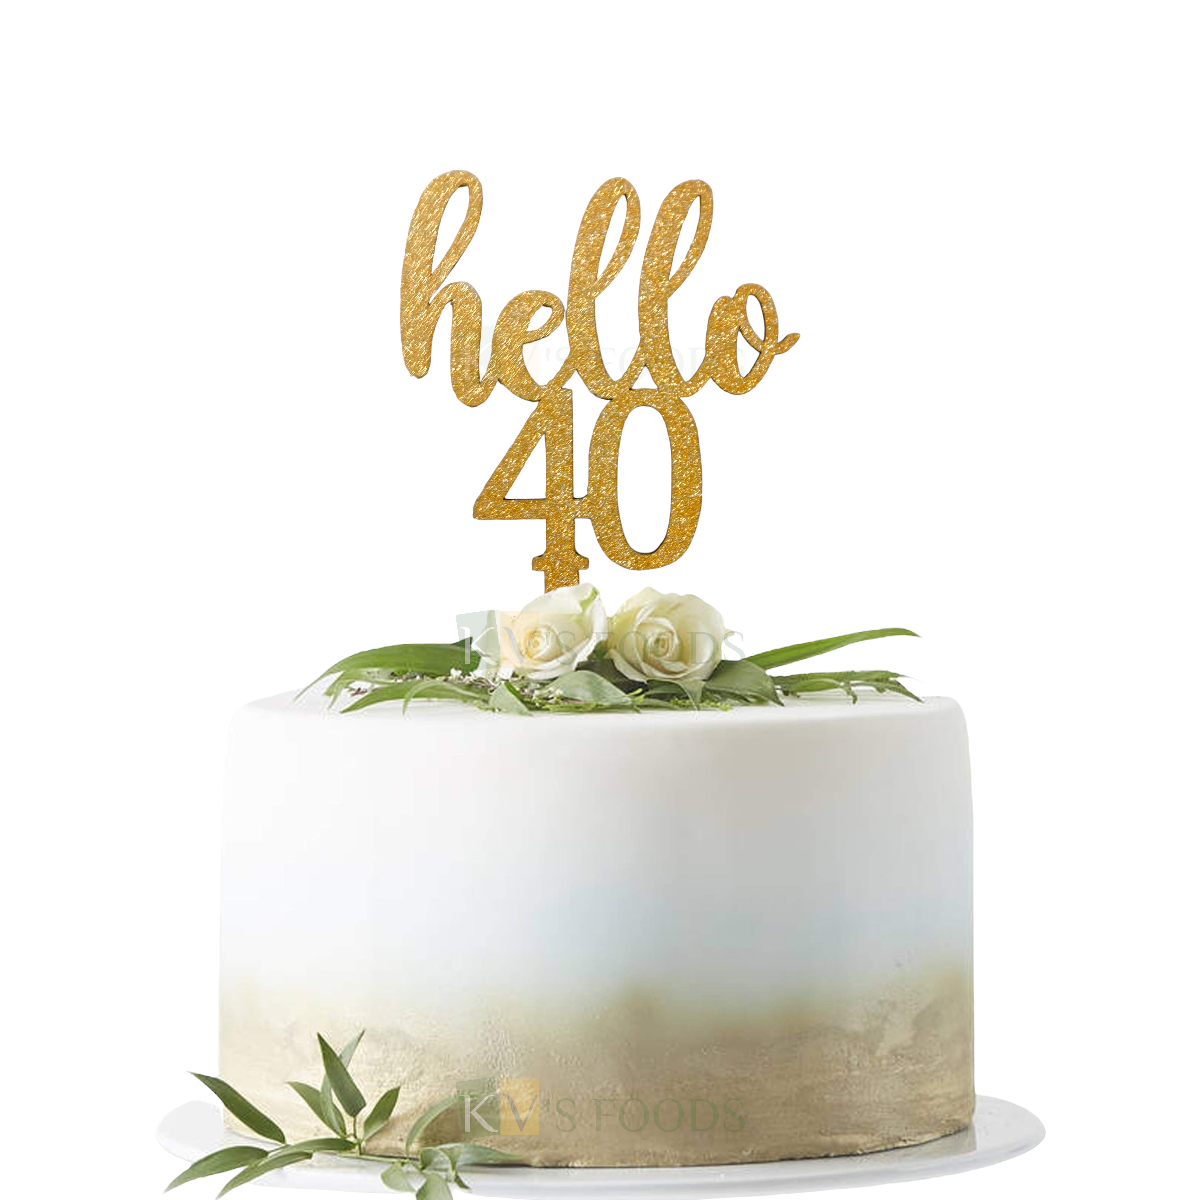 1PC Golden Shiny Glitter MDF Hello 40 Cake Topper, Happy 40th Birthday Cake Glitter Insert, 40 Number Theme Cake Topper 40 Forty Years Old Birthday party Unique Elegant Font Design DIY Cake Decoration